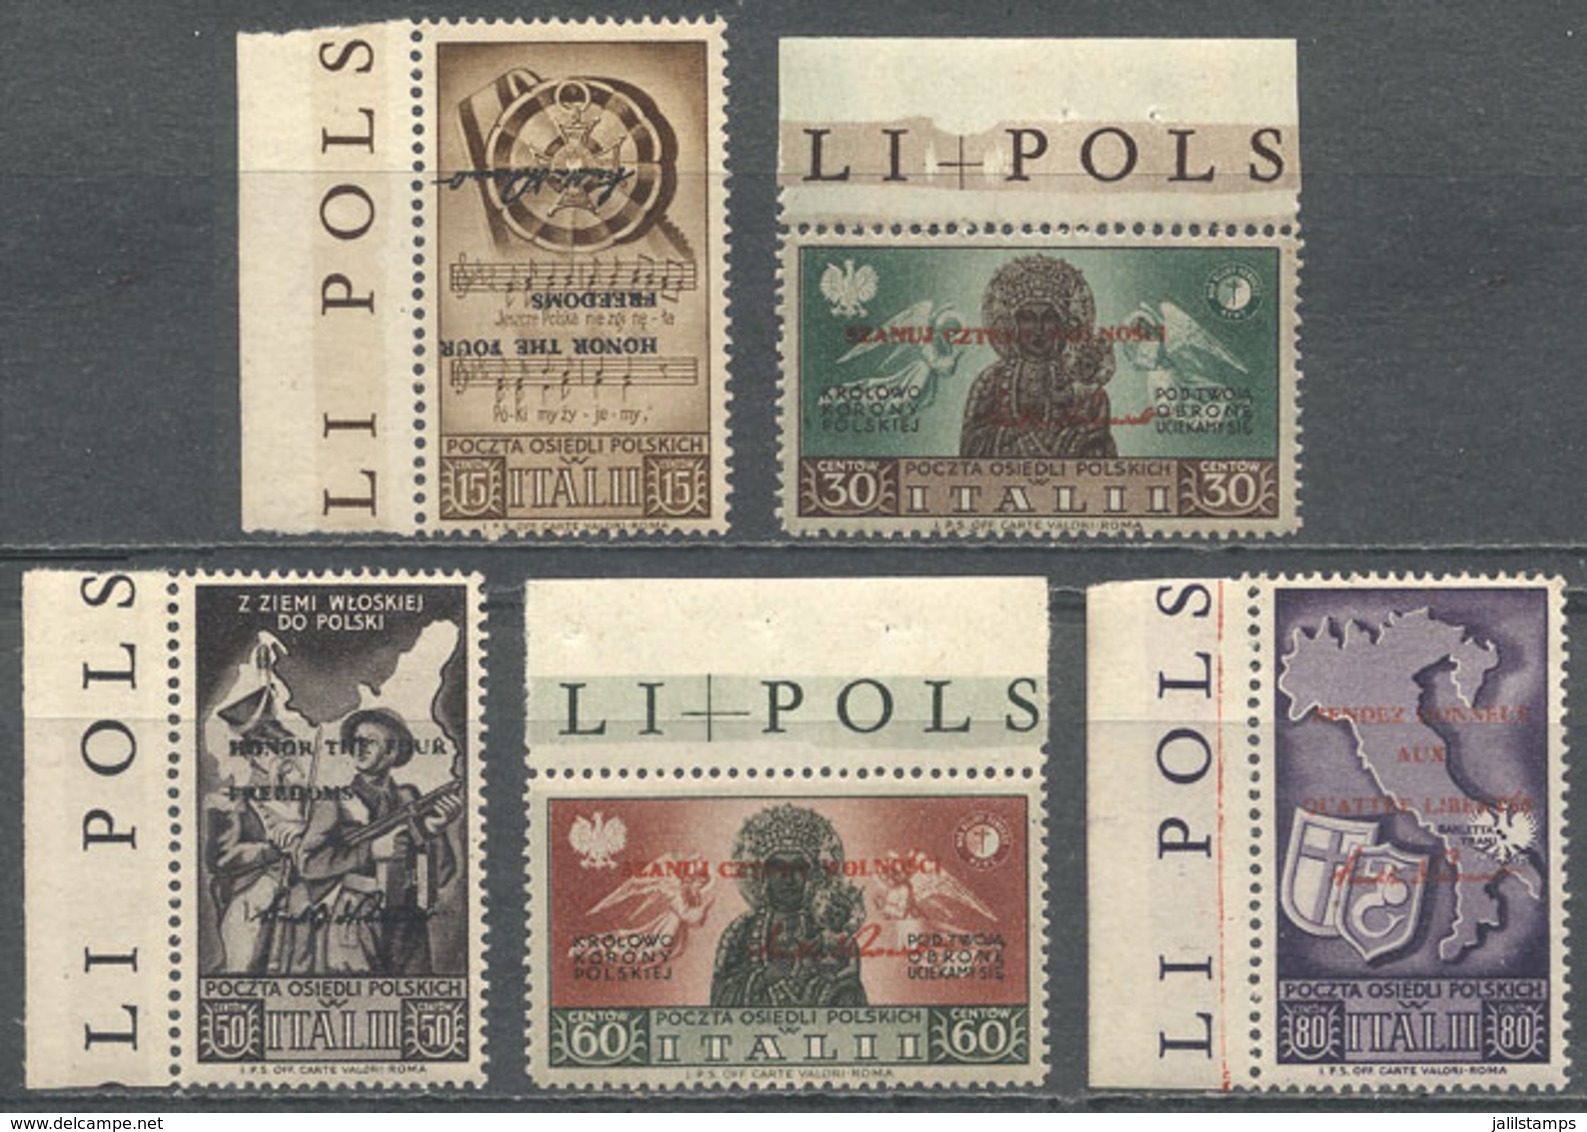 731 ITALY - POLISH CORPS: Set Of 5 Values WITH OVERPRINTS: 'Honour The Four Freedoms..' In Different Languages, In The 1 - Unclassified